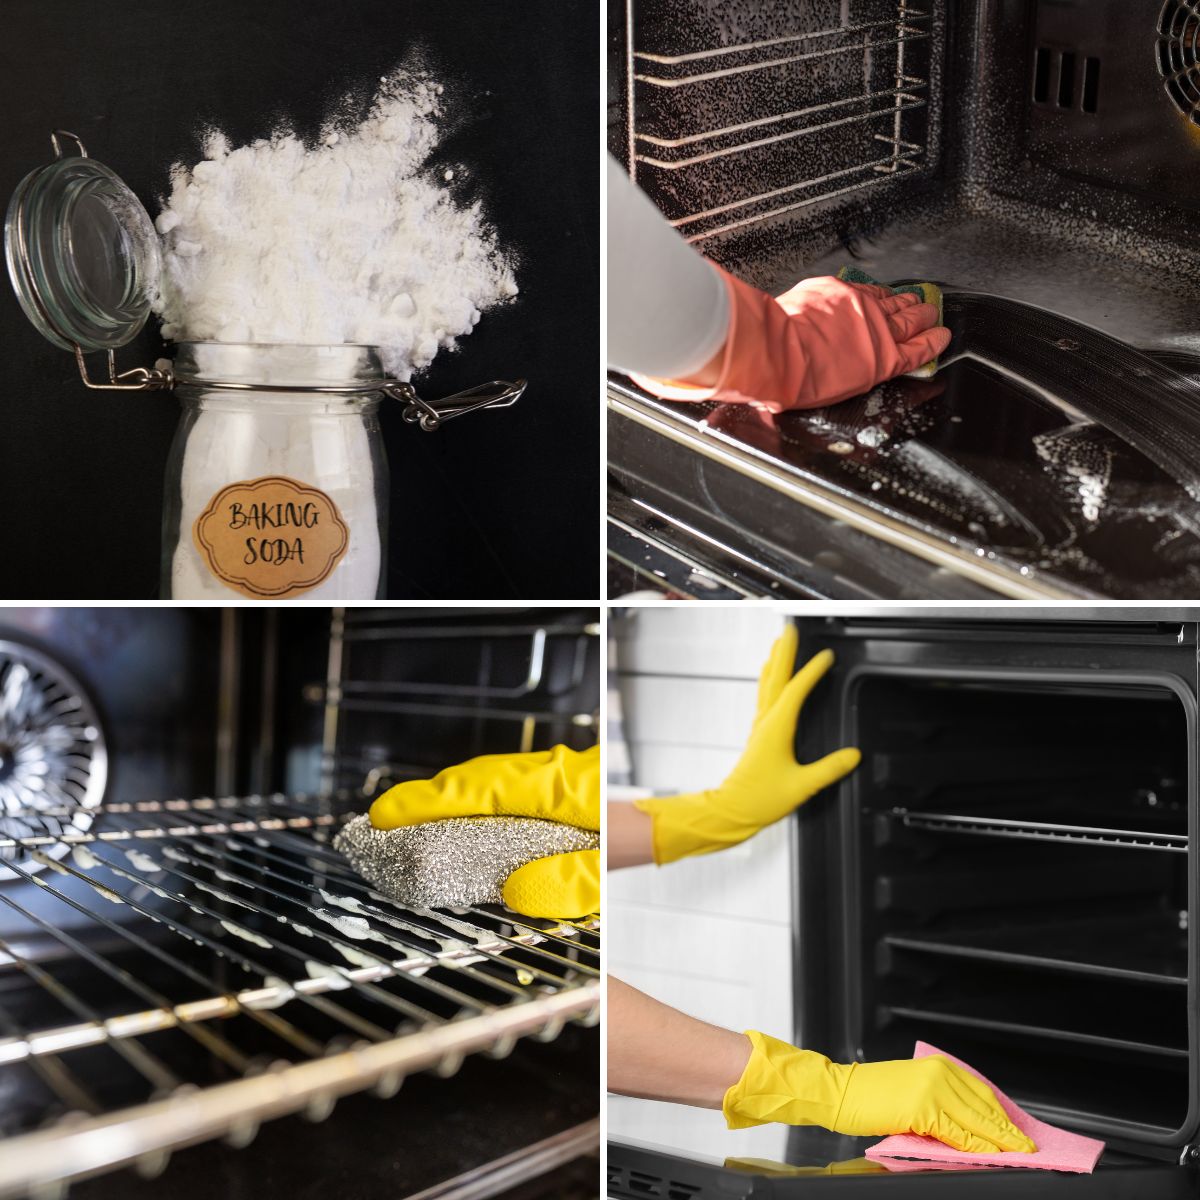 A collage of pictures showing how to clean an oven using baking soda.